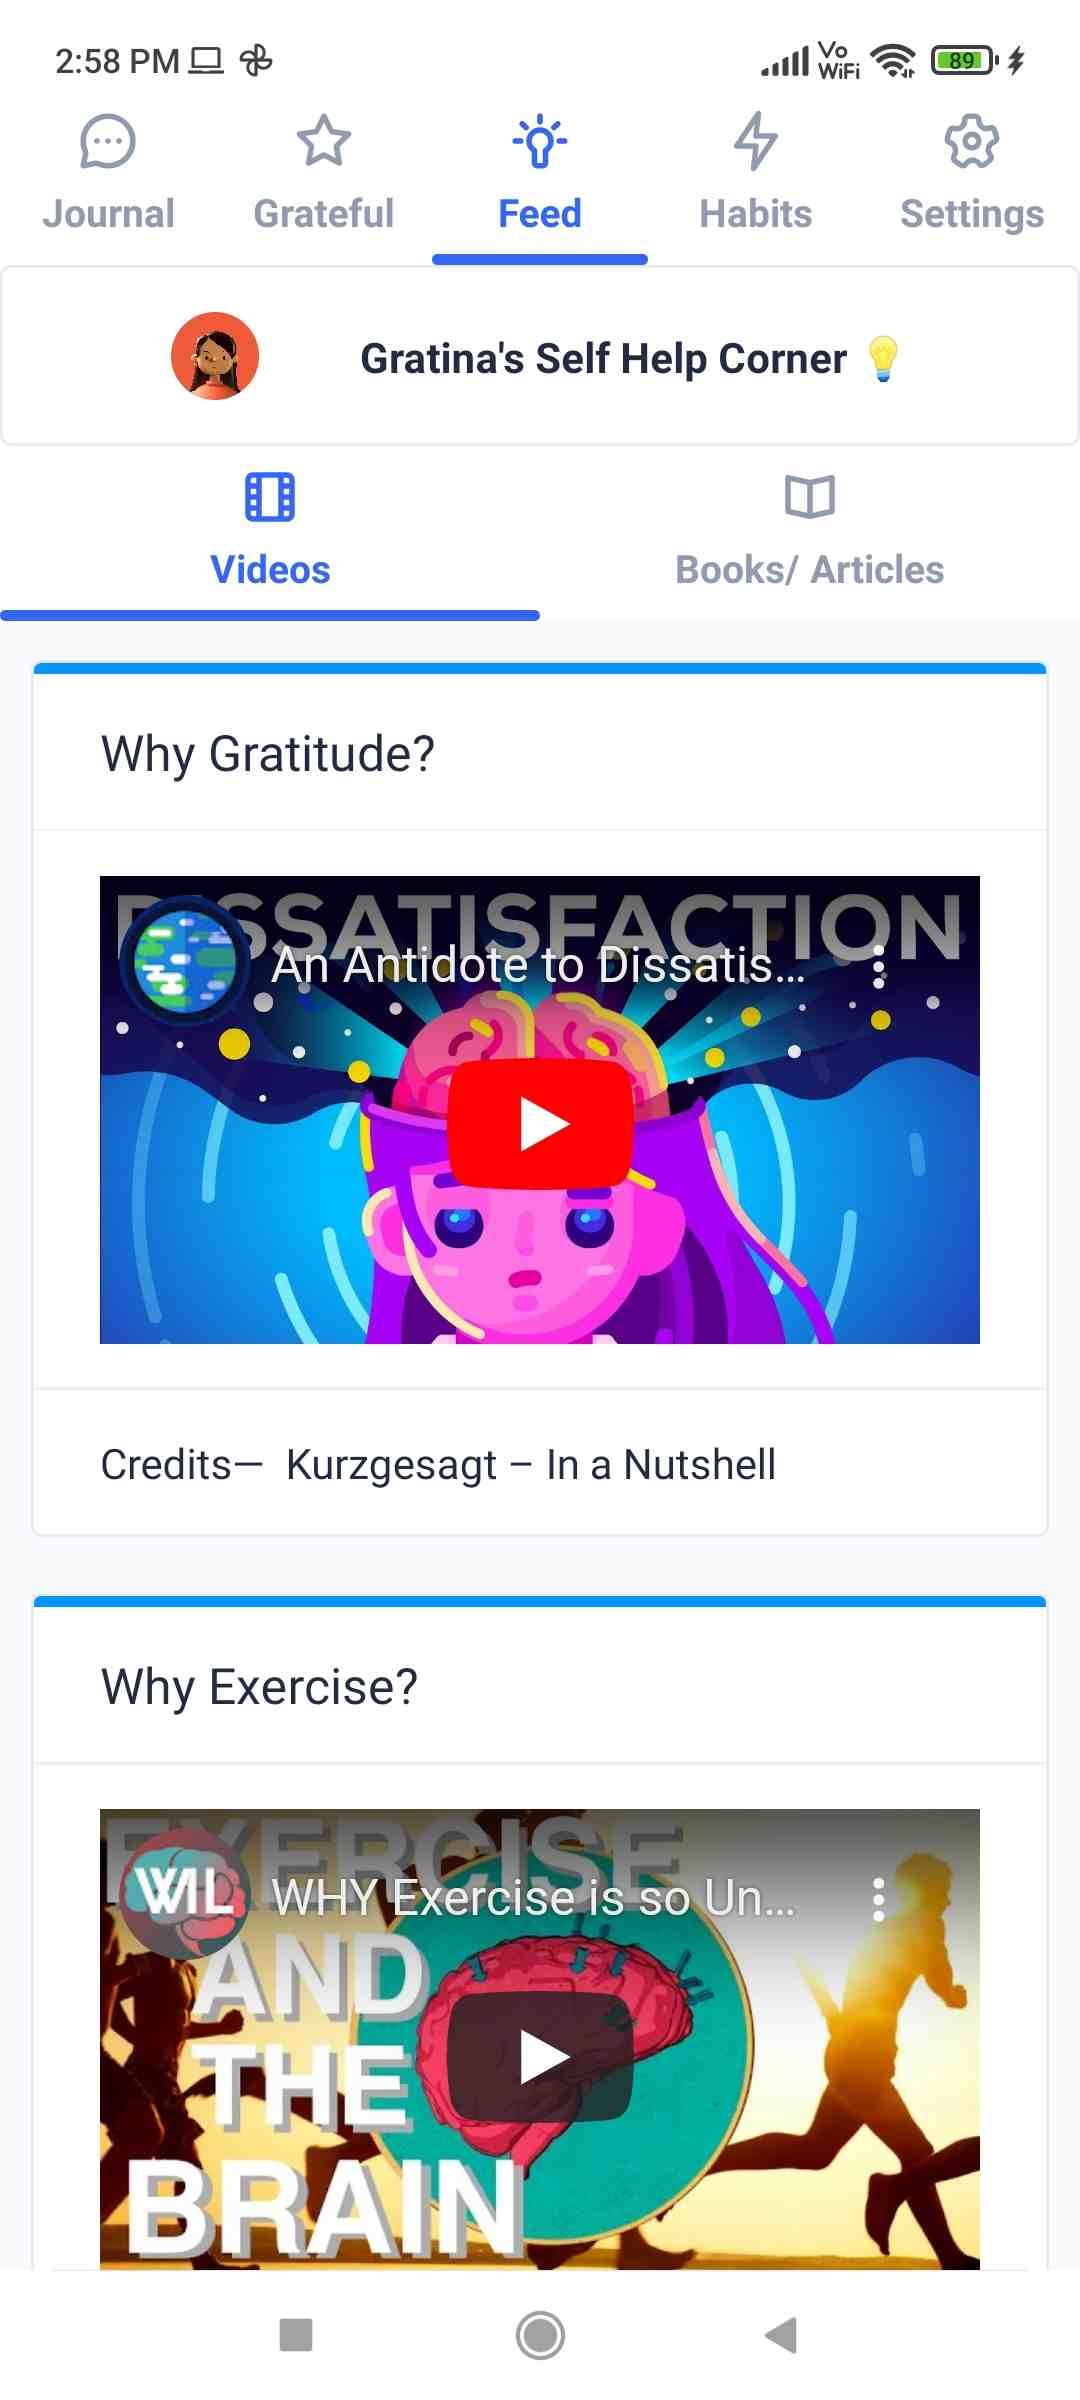 Gratitude Genie's self-help corner has several videos and articles to help boost mental health